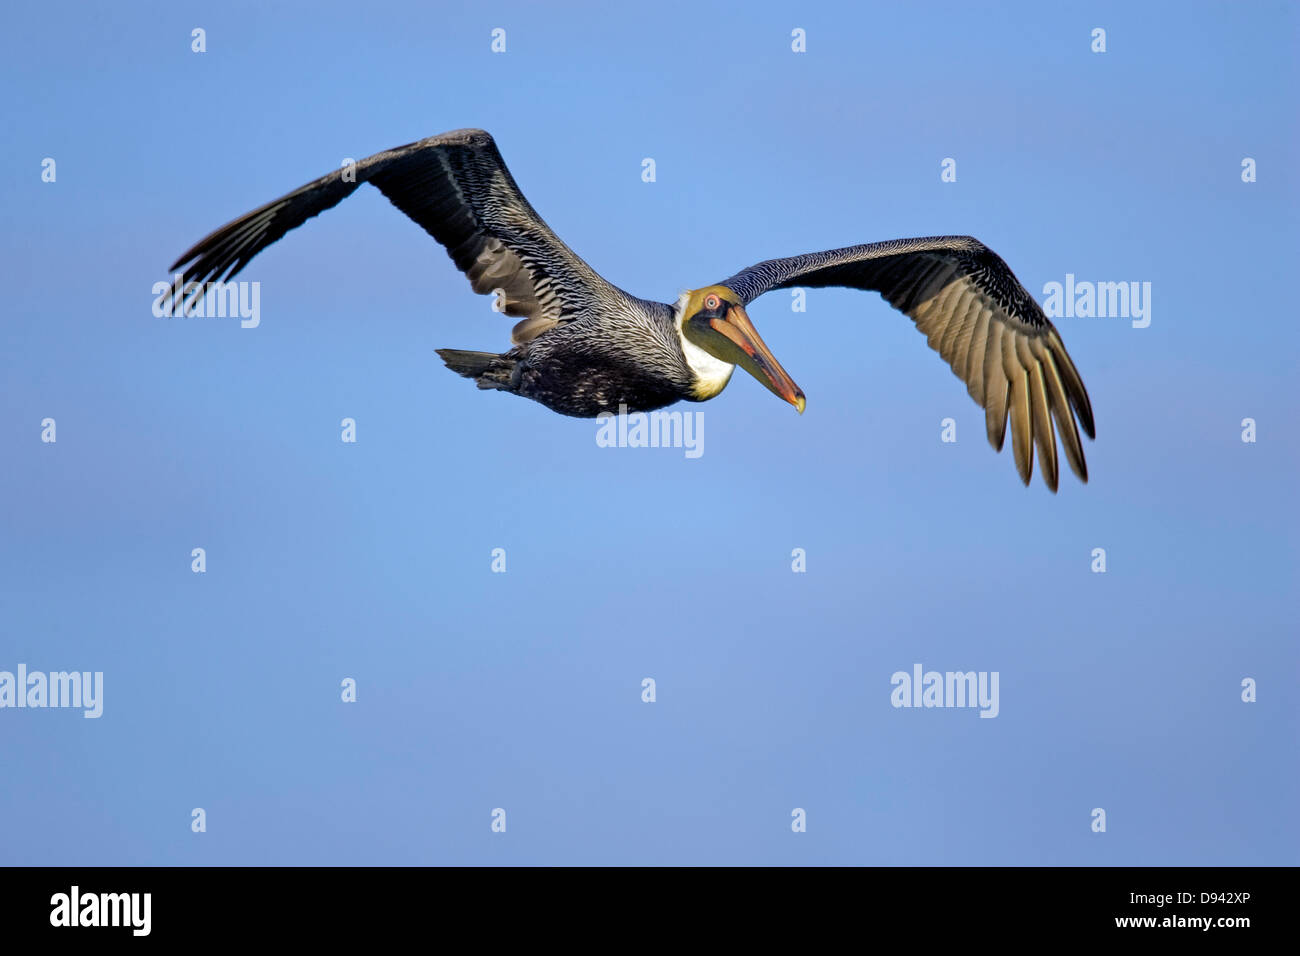 A flying pelican. Stock Photo